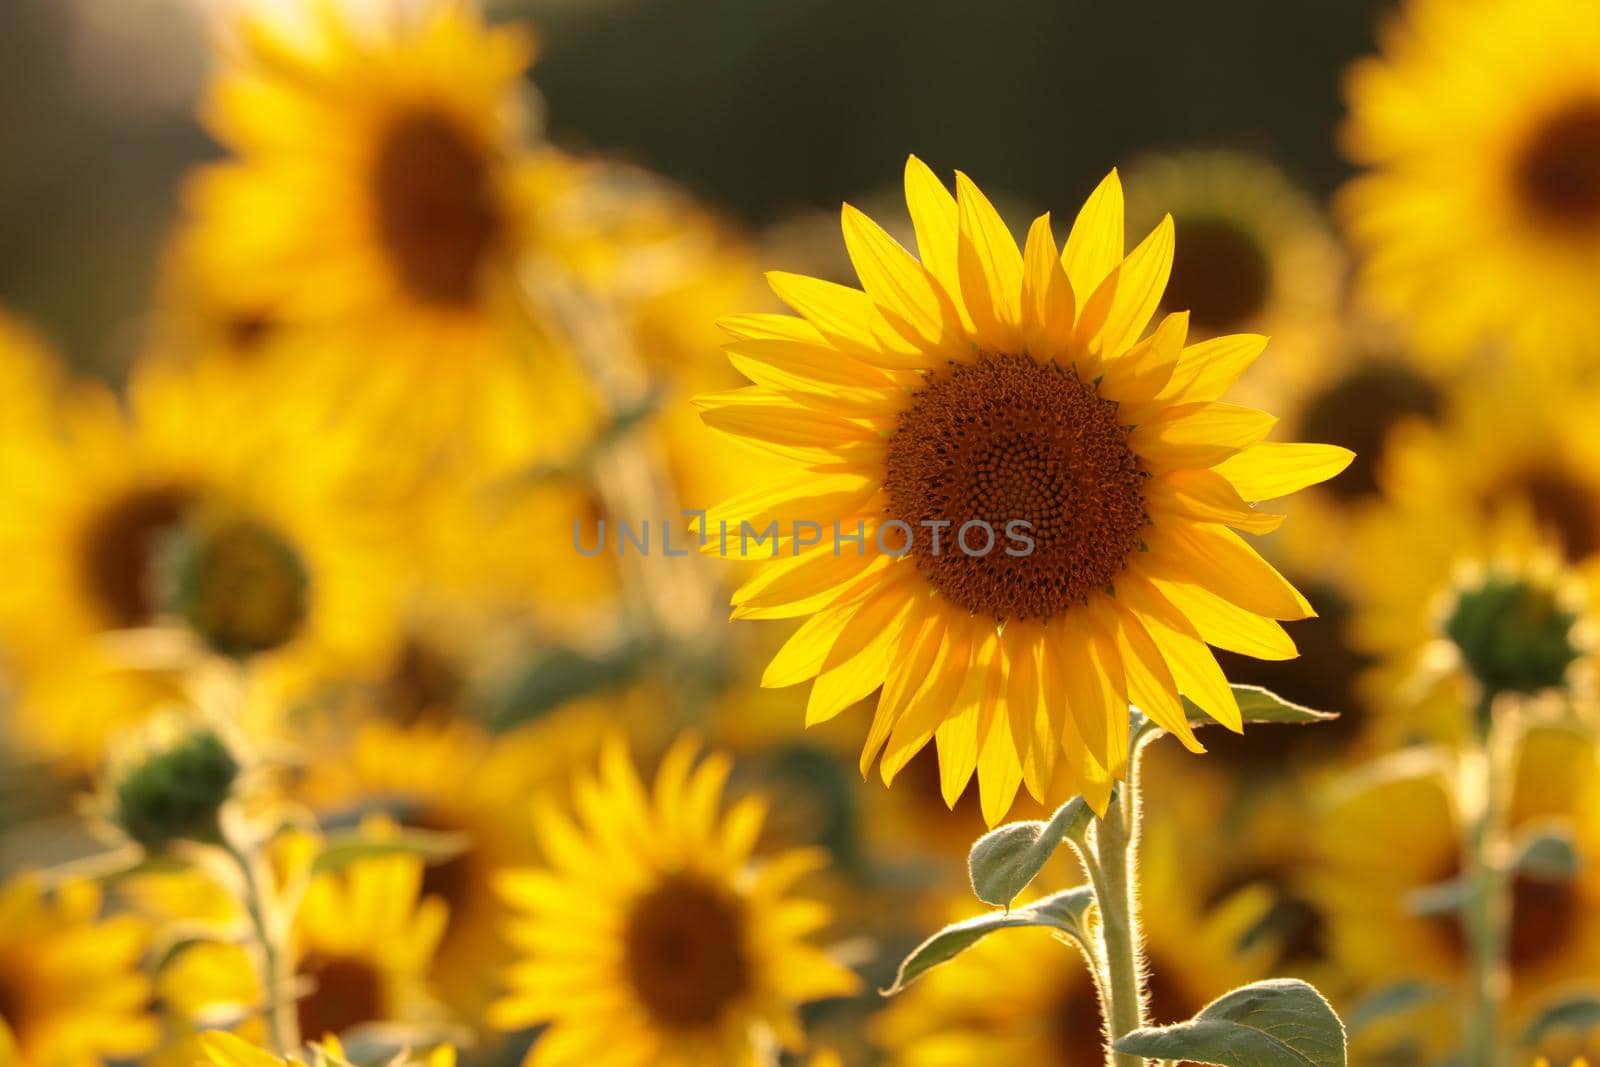 Sunflower by nature78